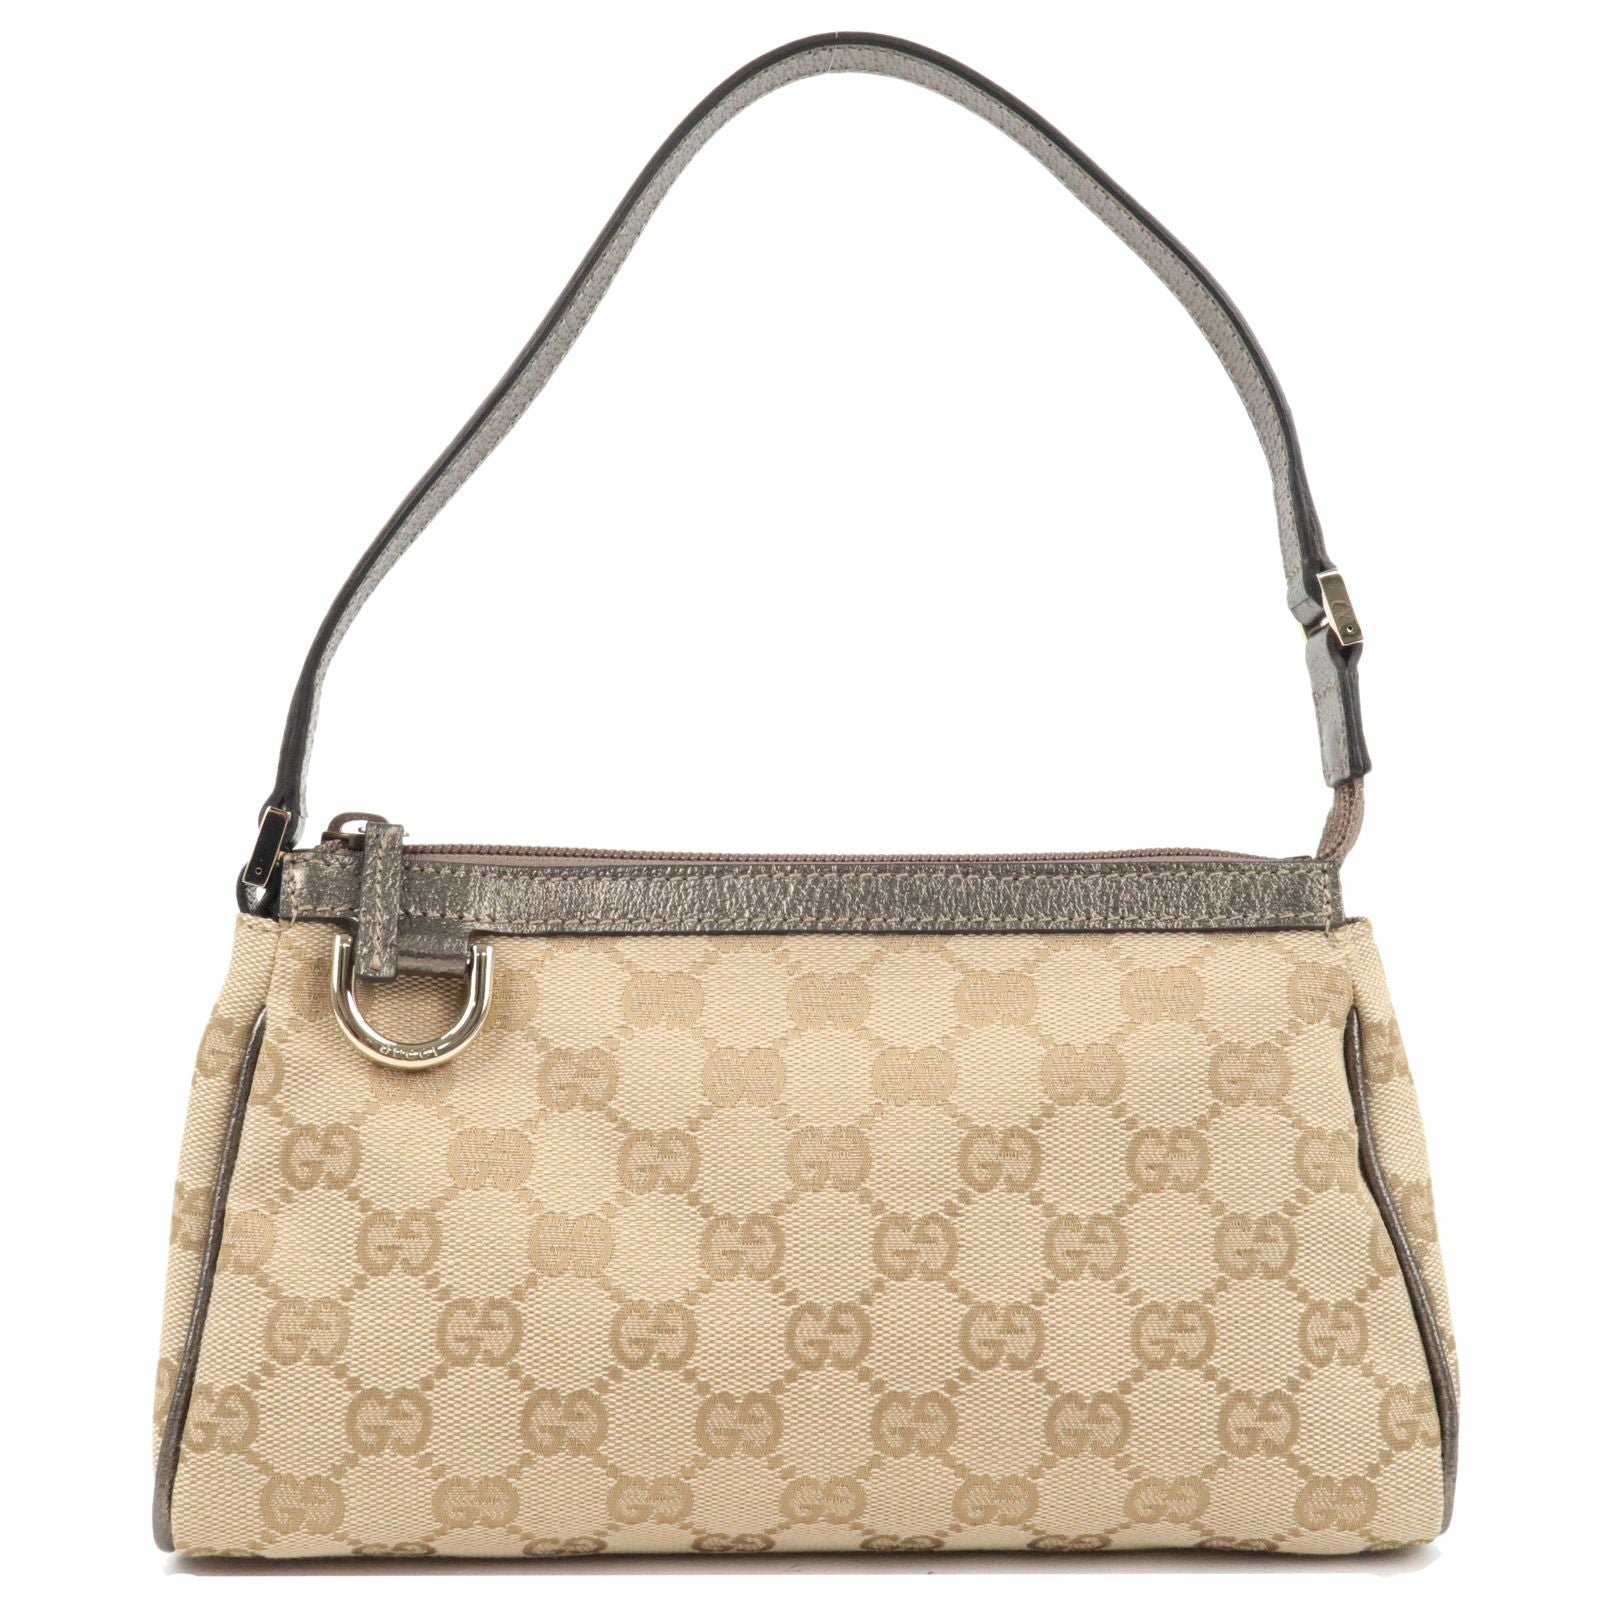 GUCCI-Abbey-GG-Canvas-Leather-Pouch-Hand-Bag-Beige-145750